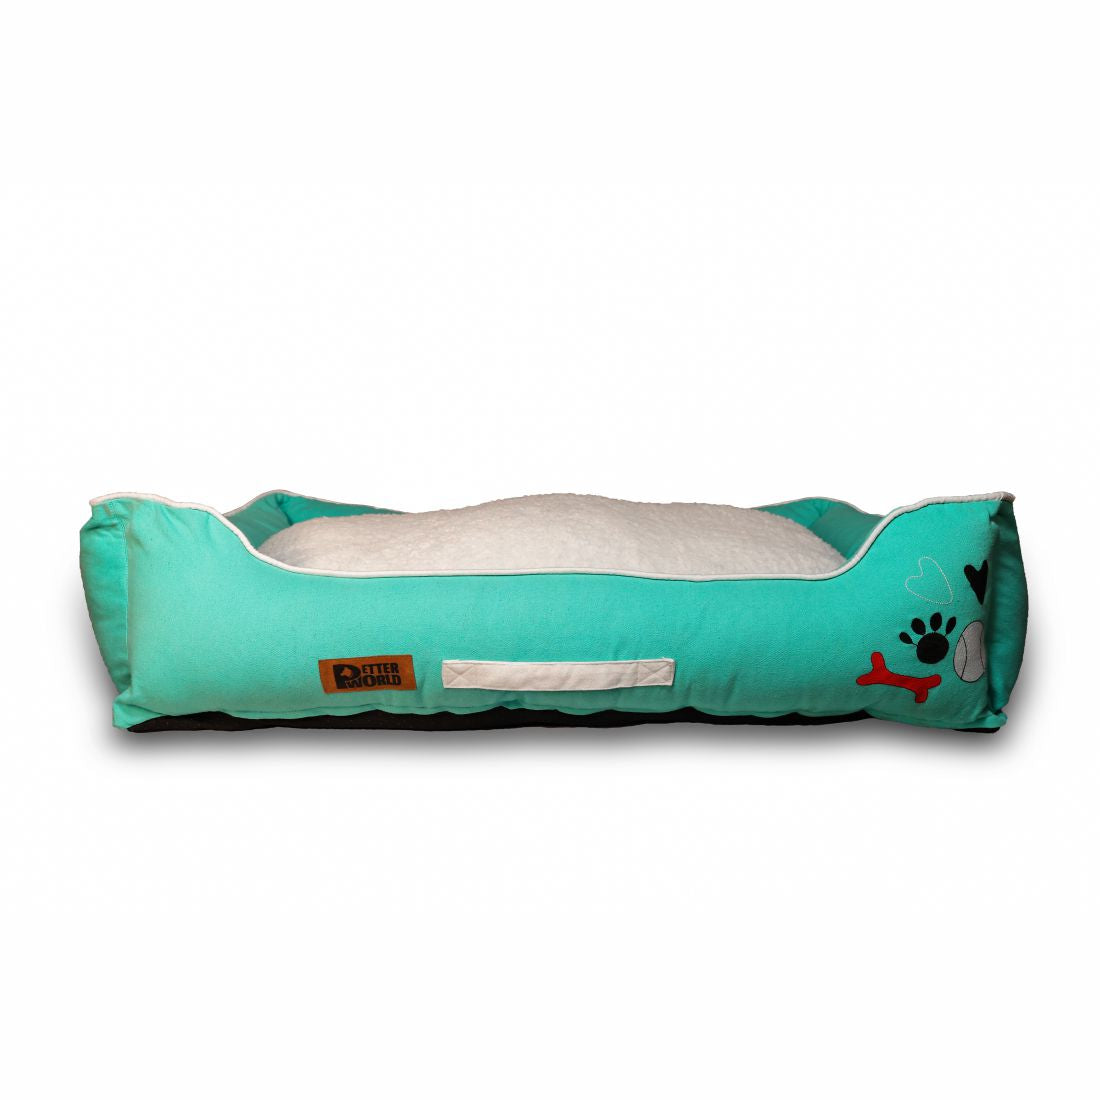 Luxury Lounger Bed Cover - Turquoise